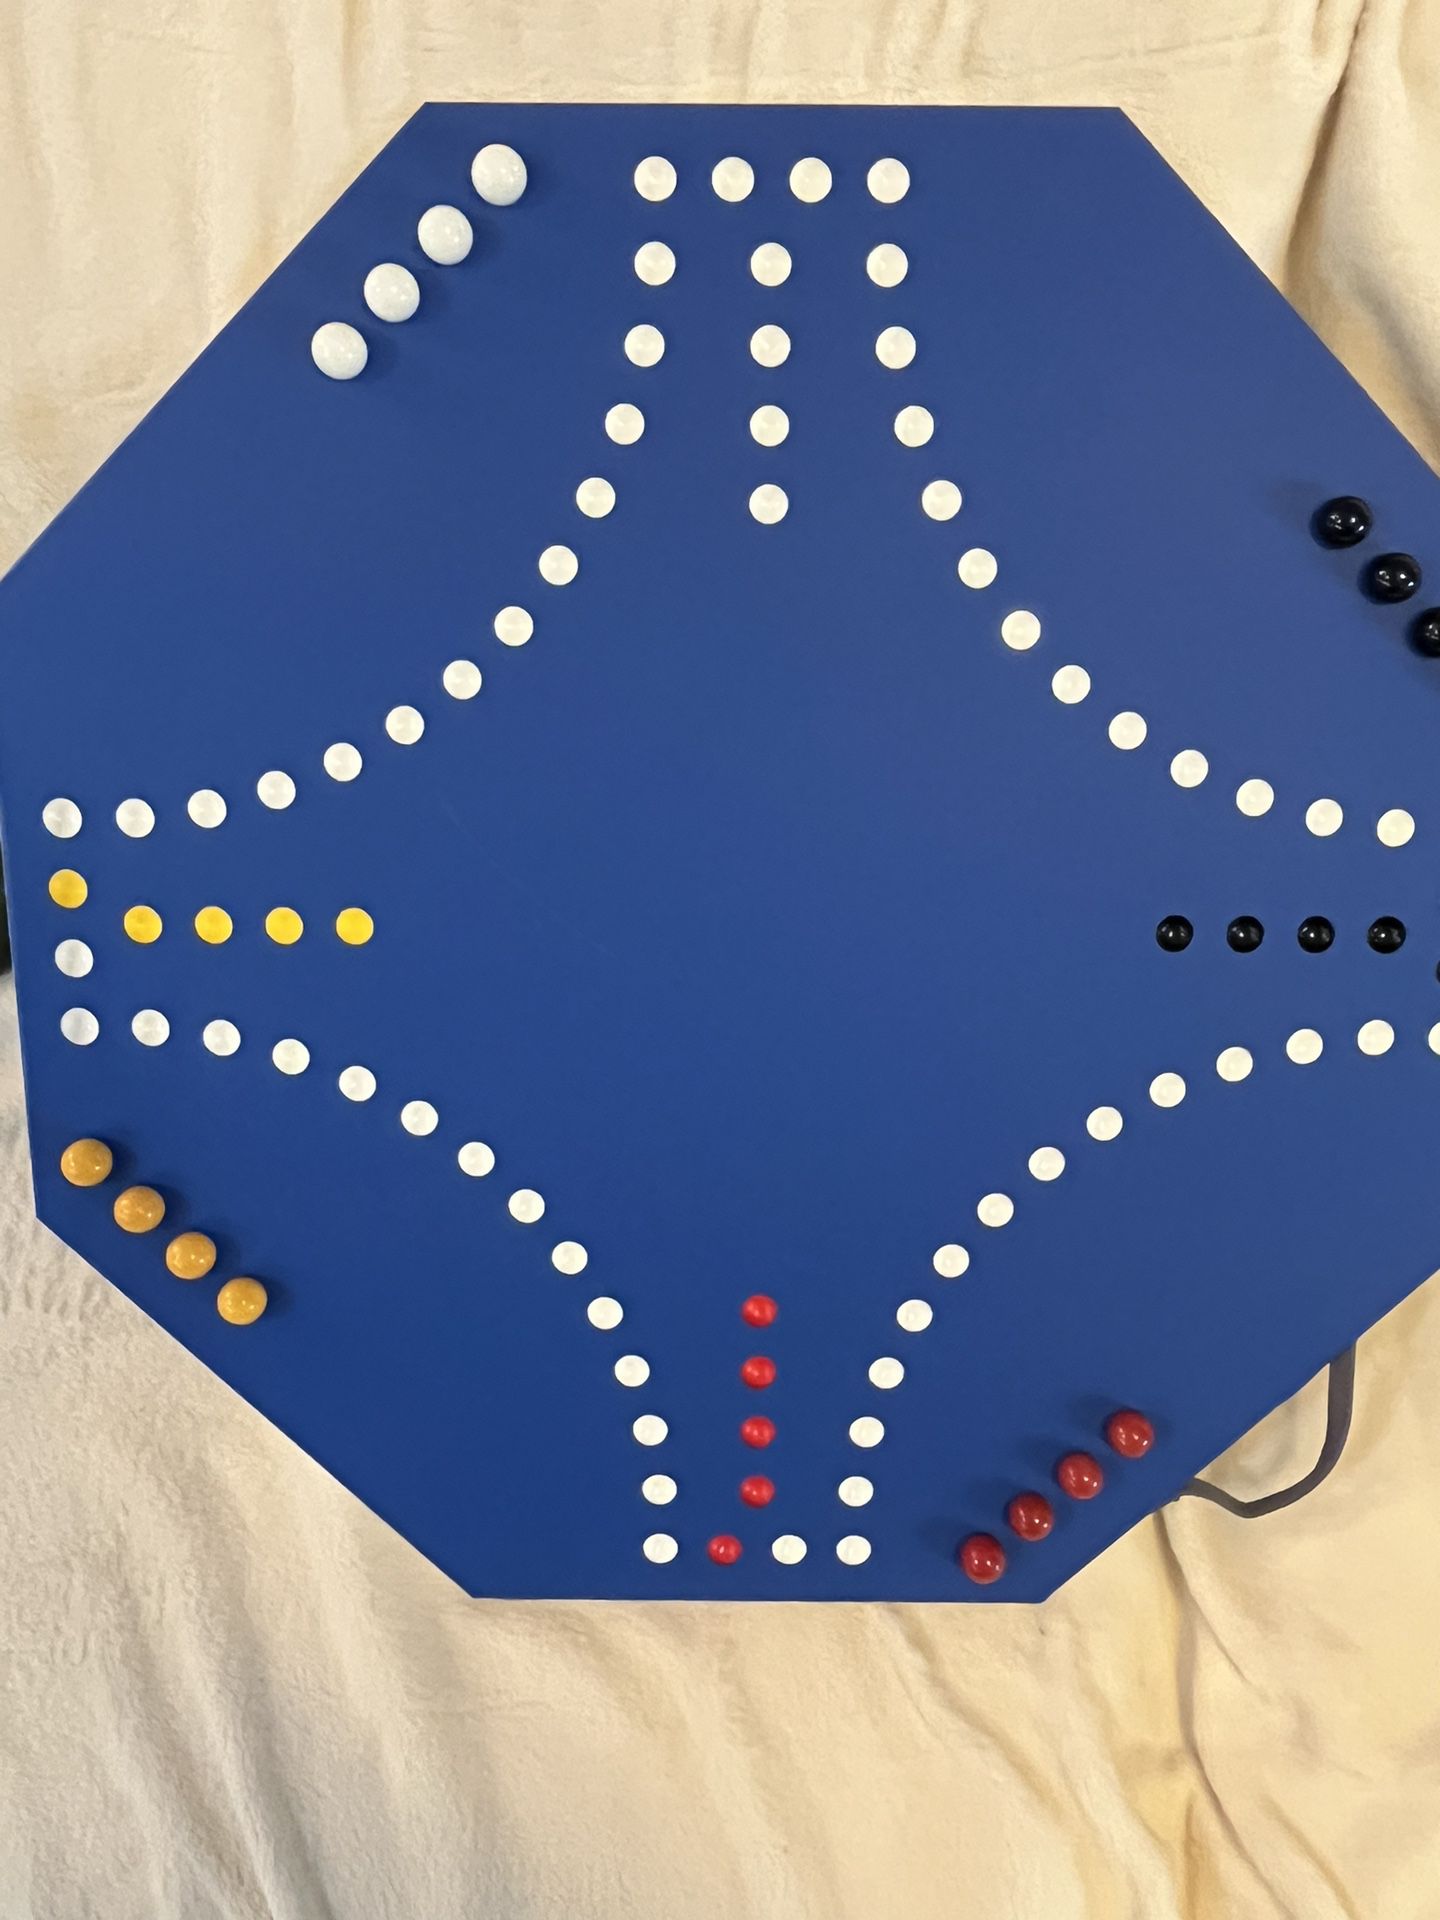 Marble Chase Board